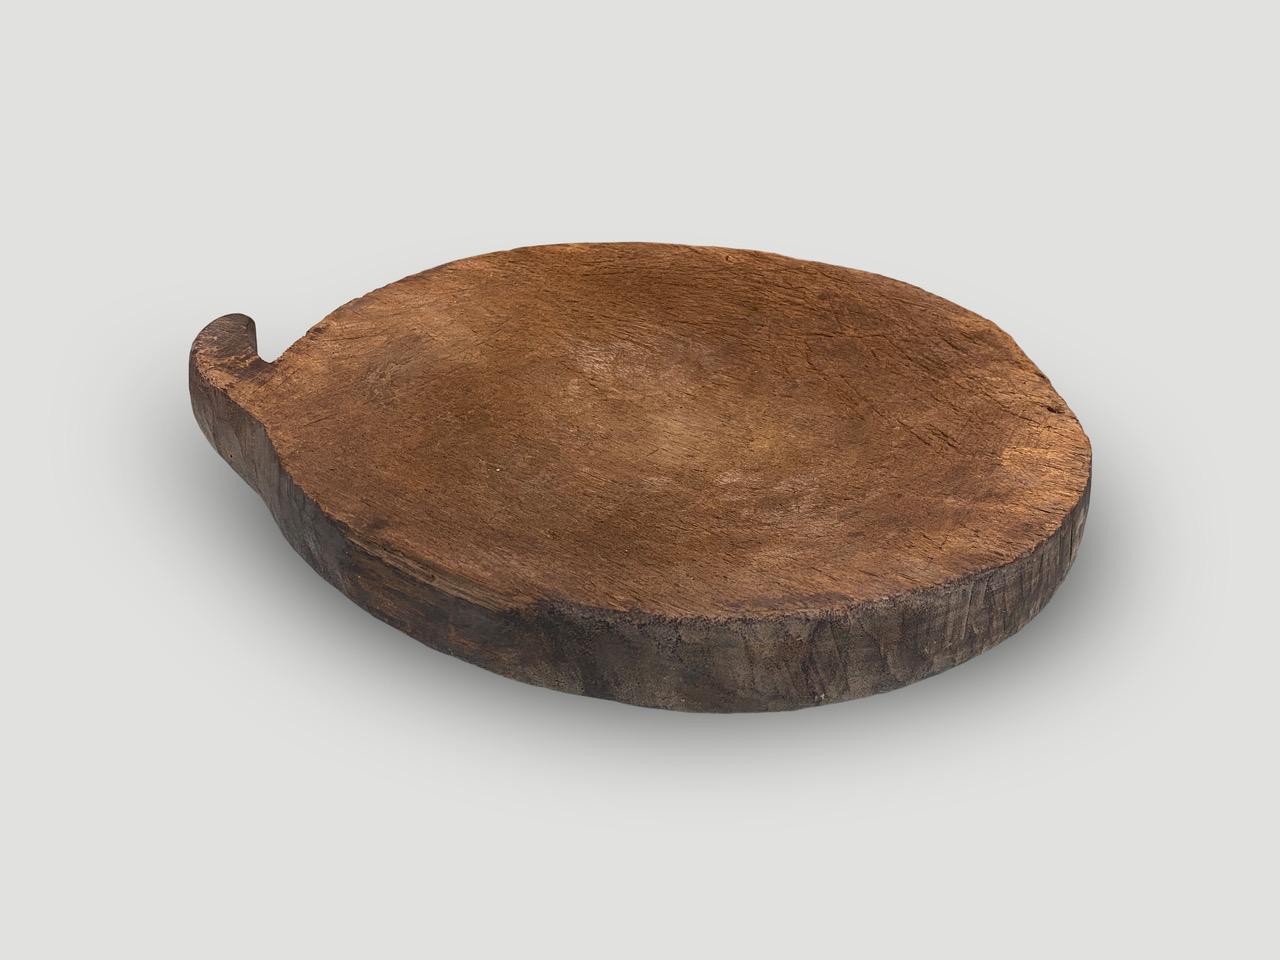 Andrianna Shamaris Antique Wabi Sabi Wood Platter In Excellent Condition For Sale In New York, NY